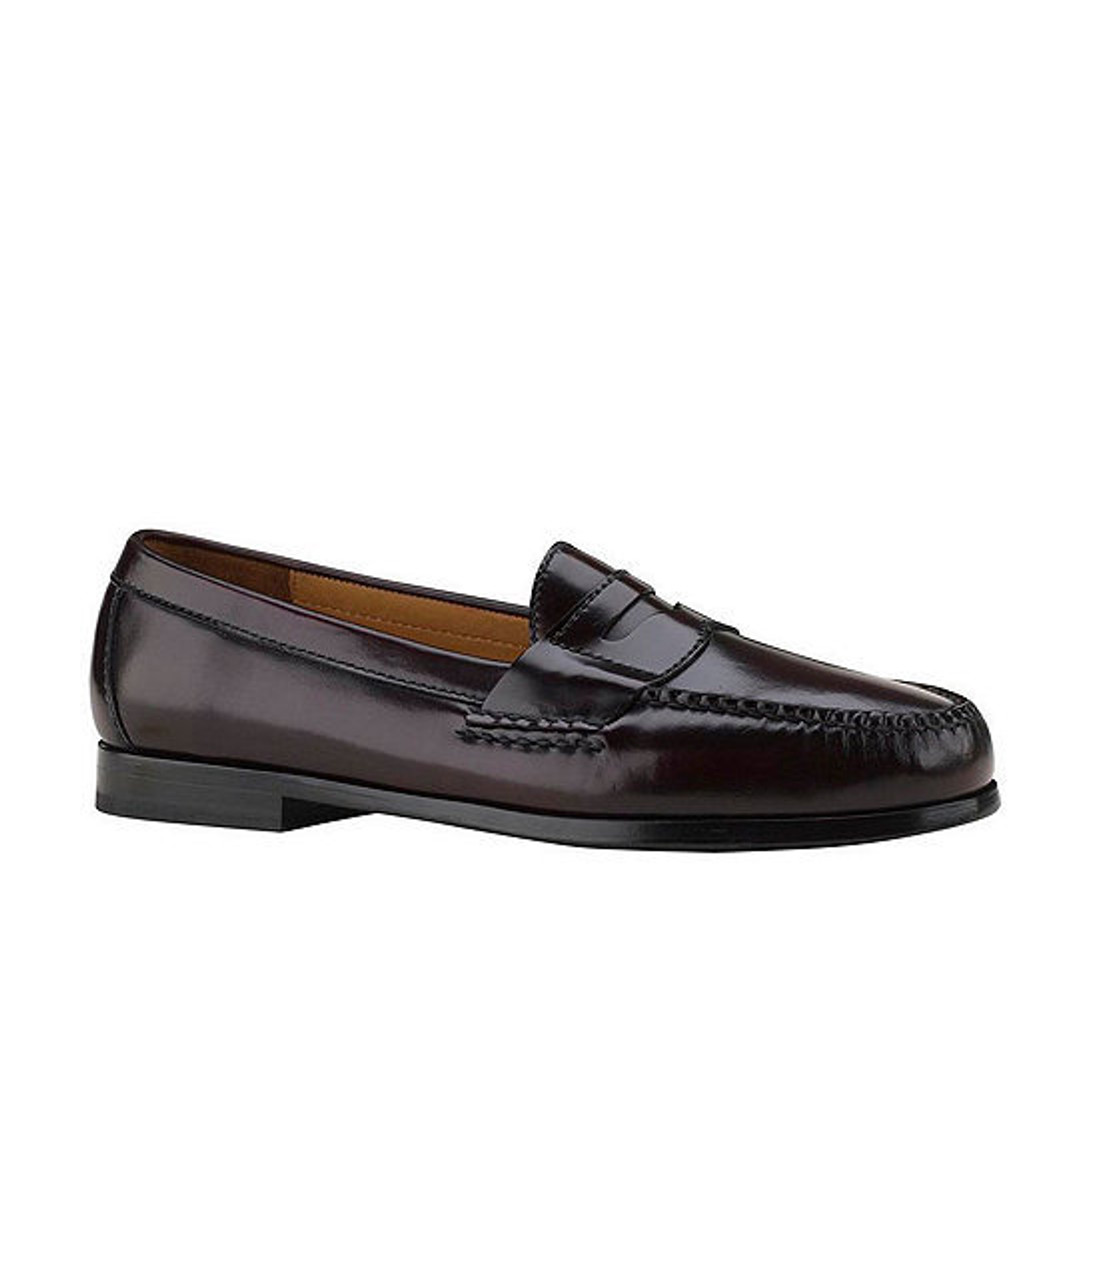 Cole Haan Pinch Penny - Burgundy - Goodman's Shoes